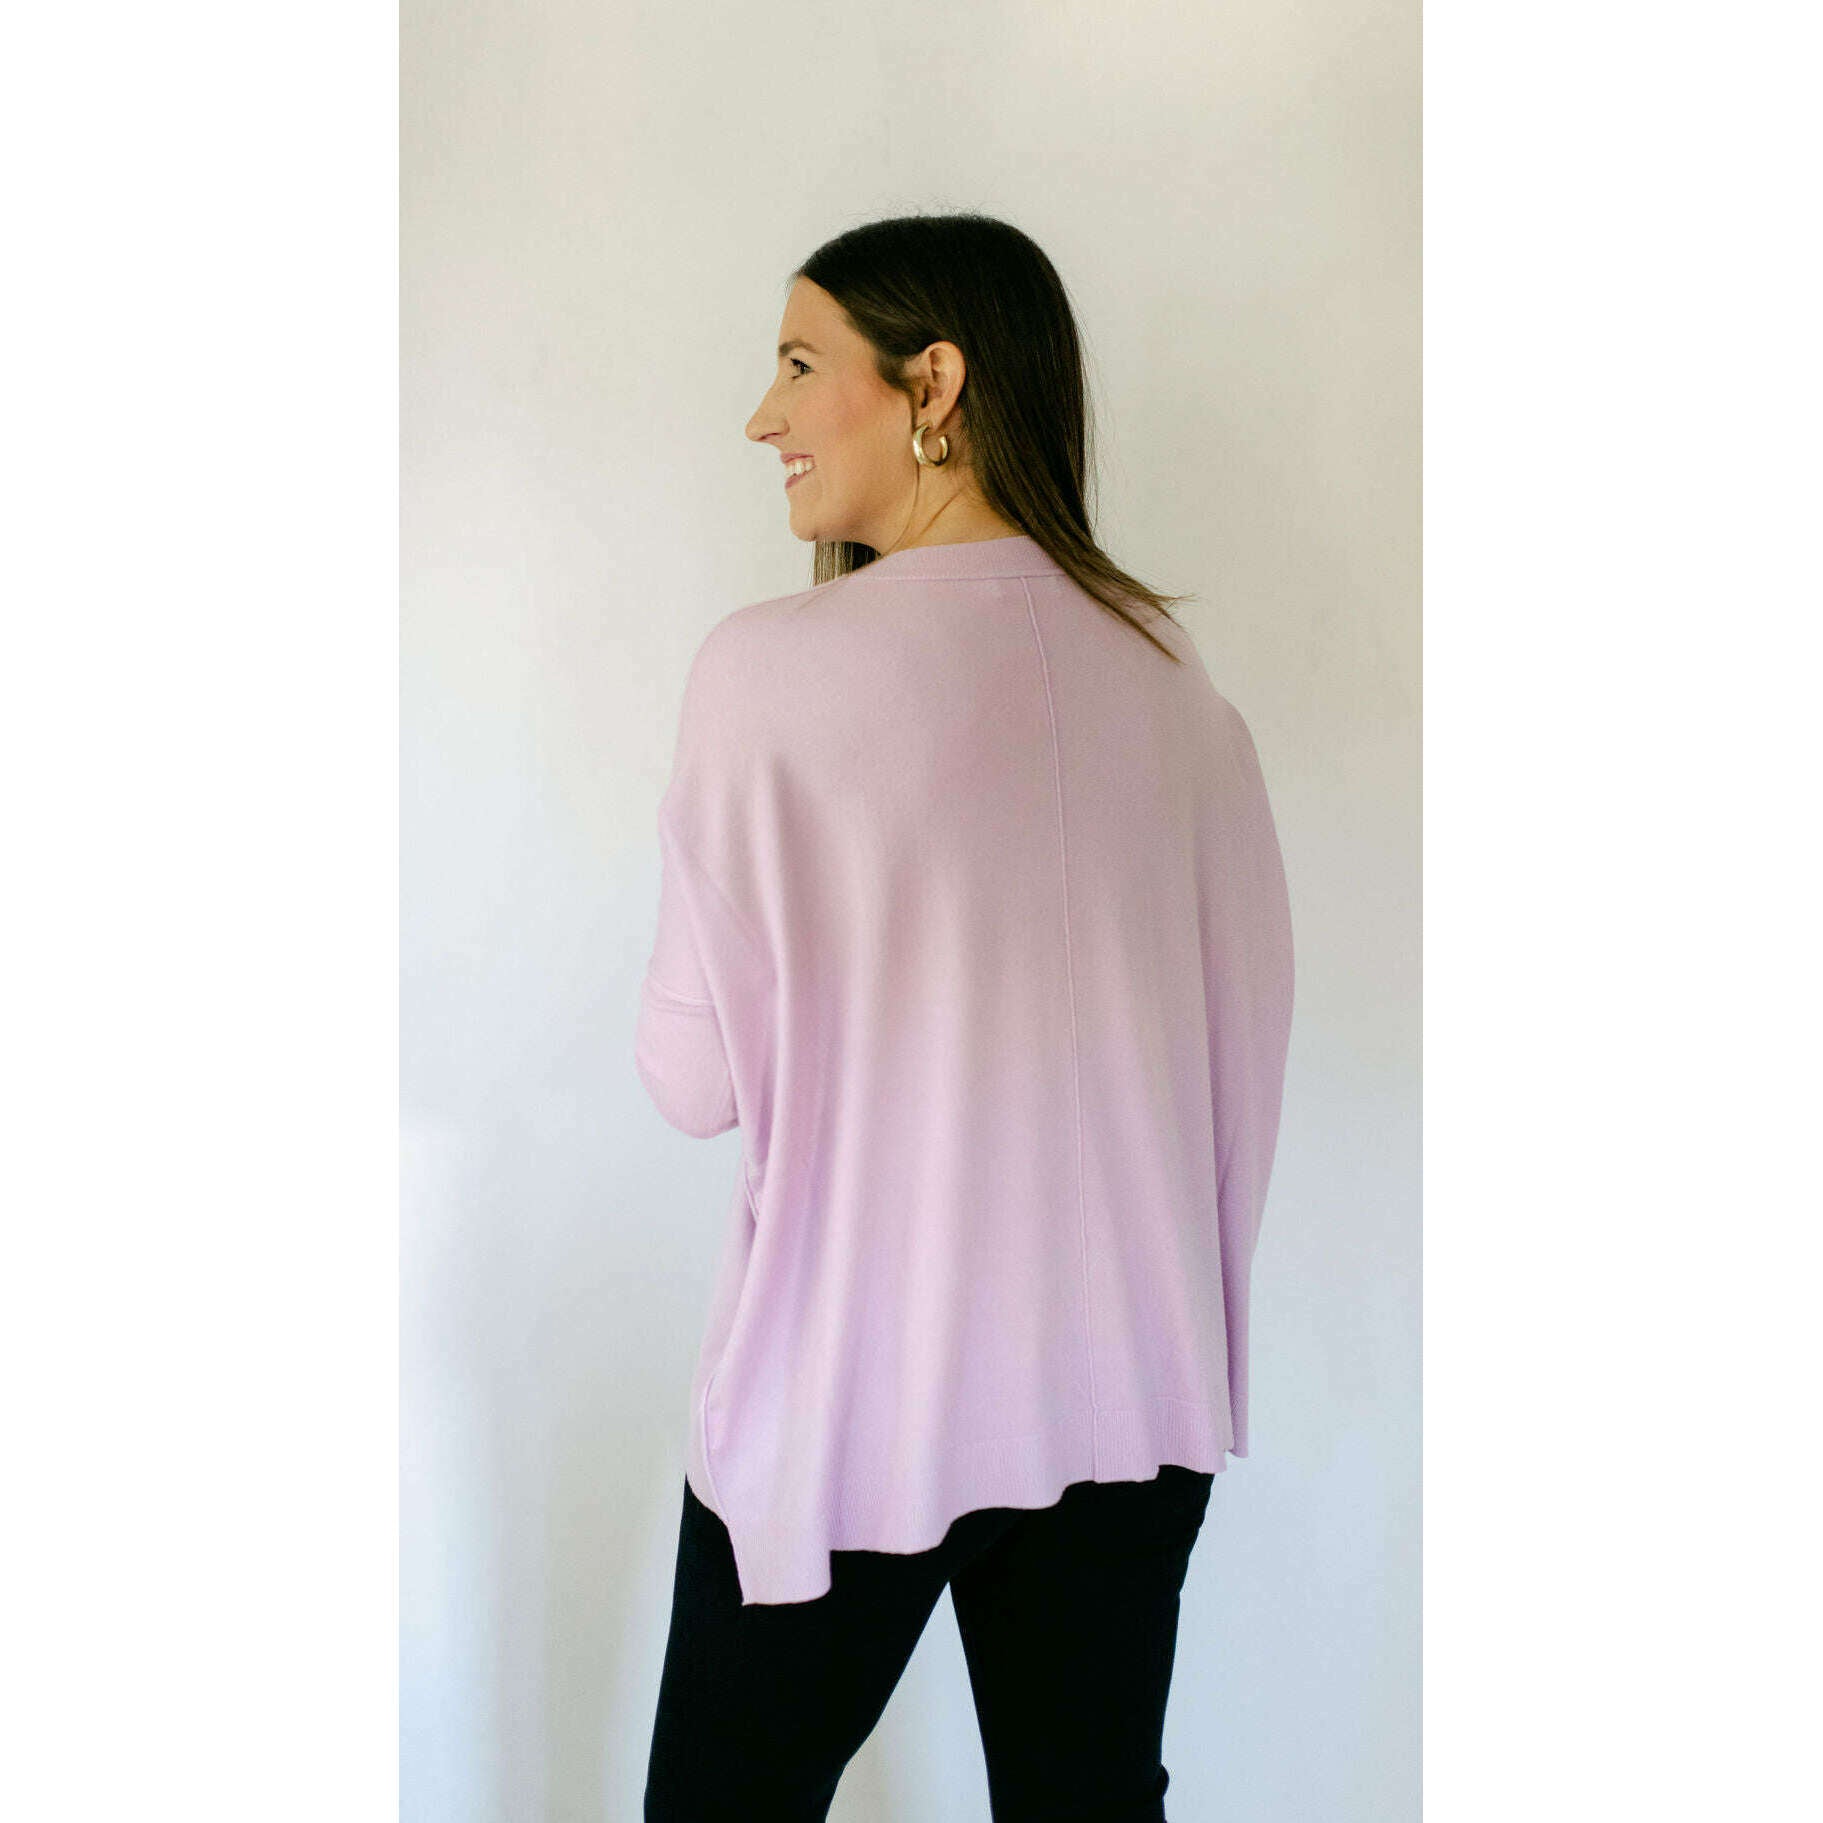 8.28 Boutique:Karlie Clothes,Karlie Solid Novelty Crew Sweater in Lavender,Sweaters